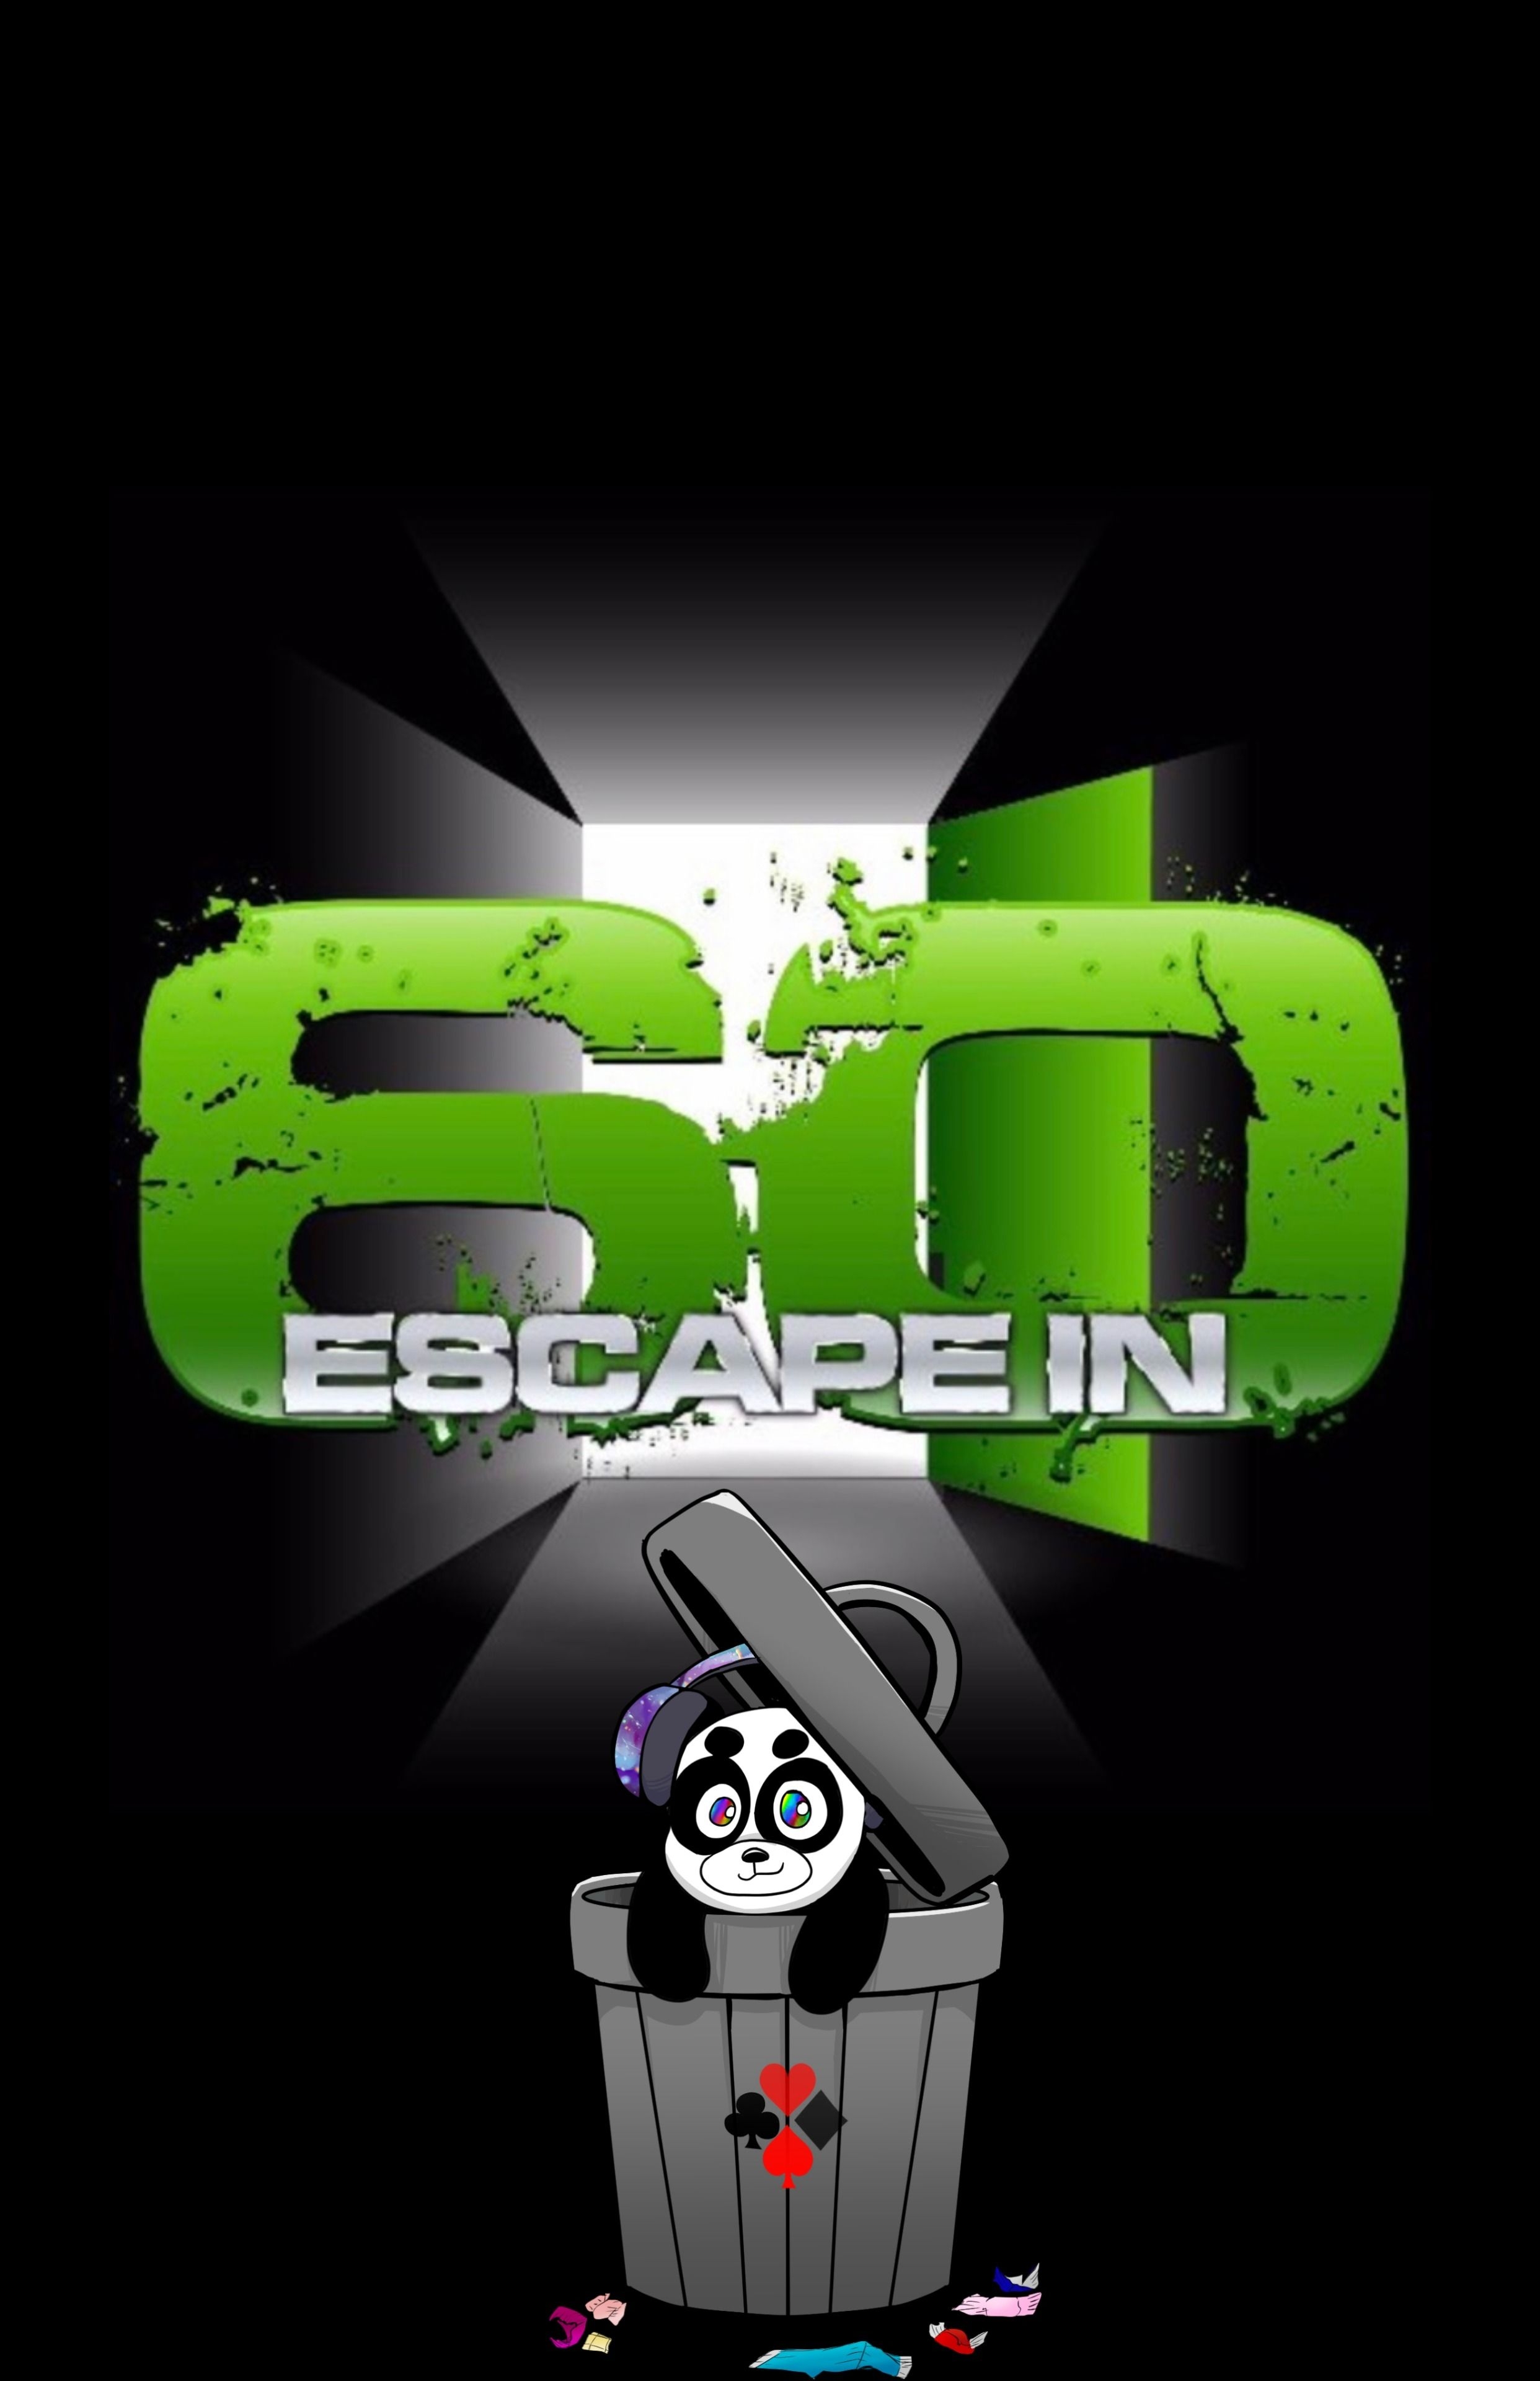 DJ from Escape in 60